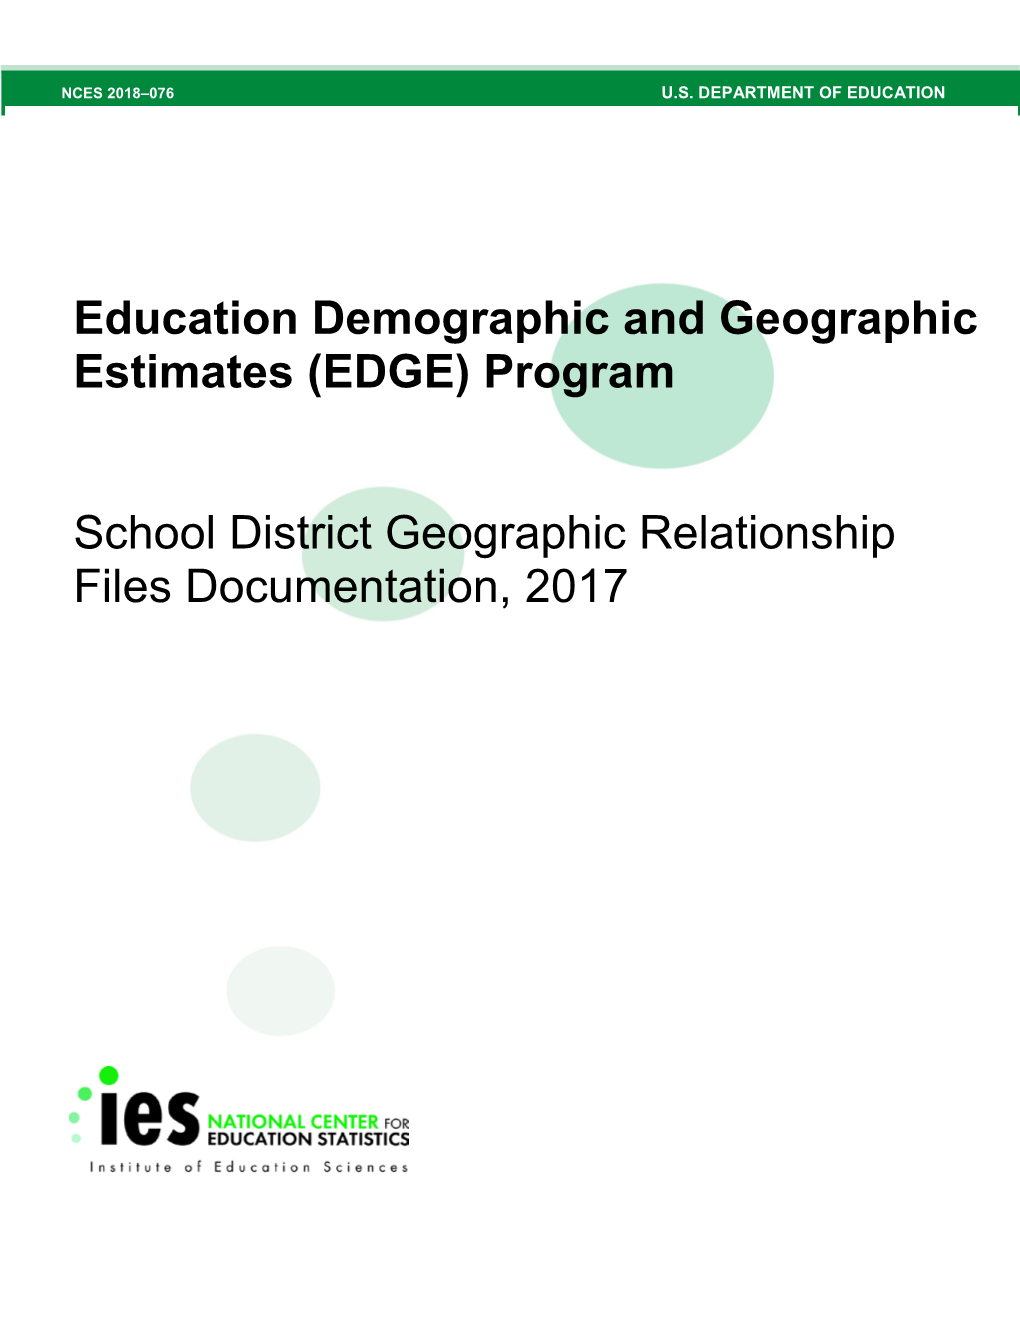 School District Geographic Relationship Files Documentation, 2017